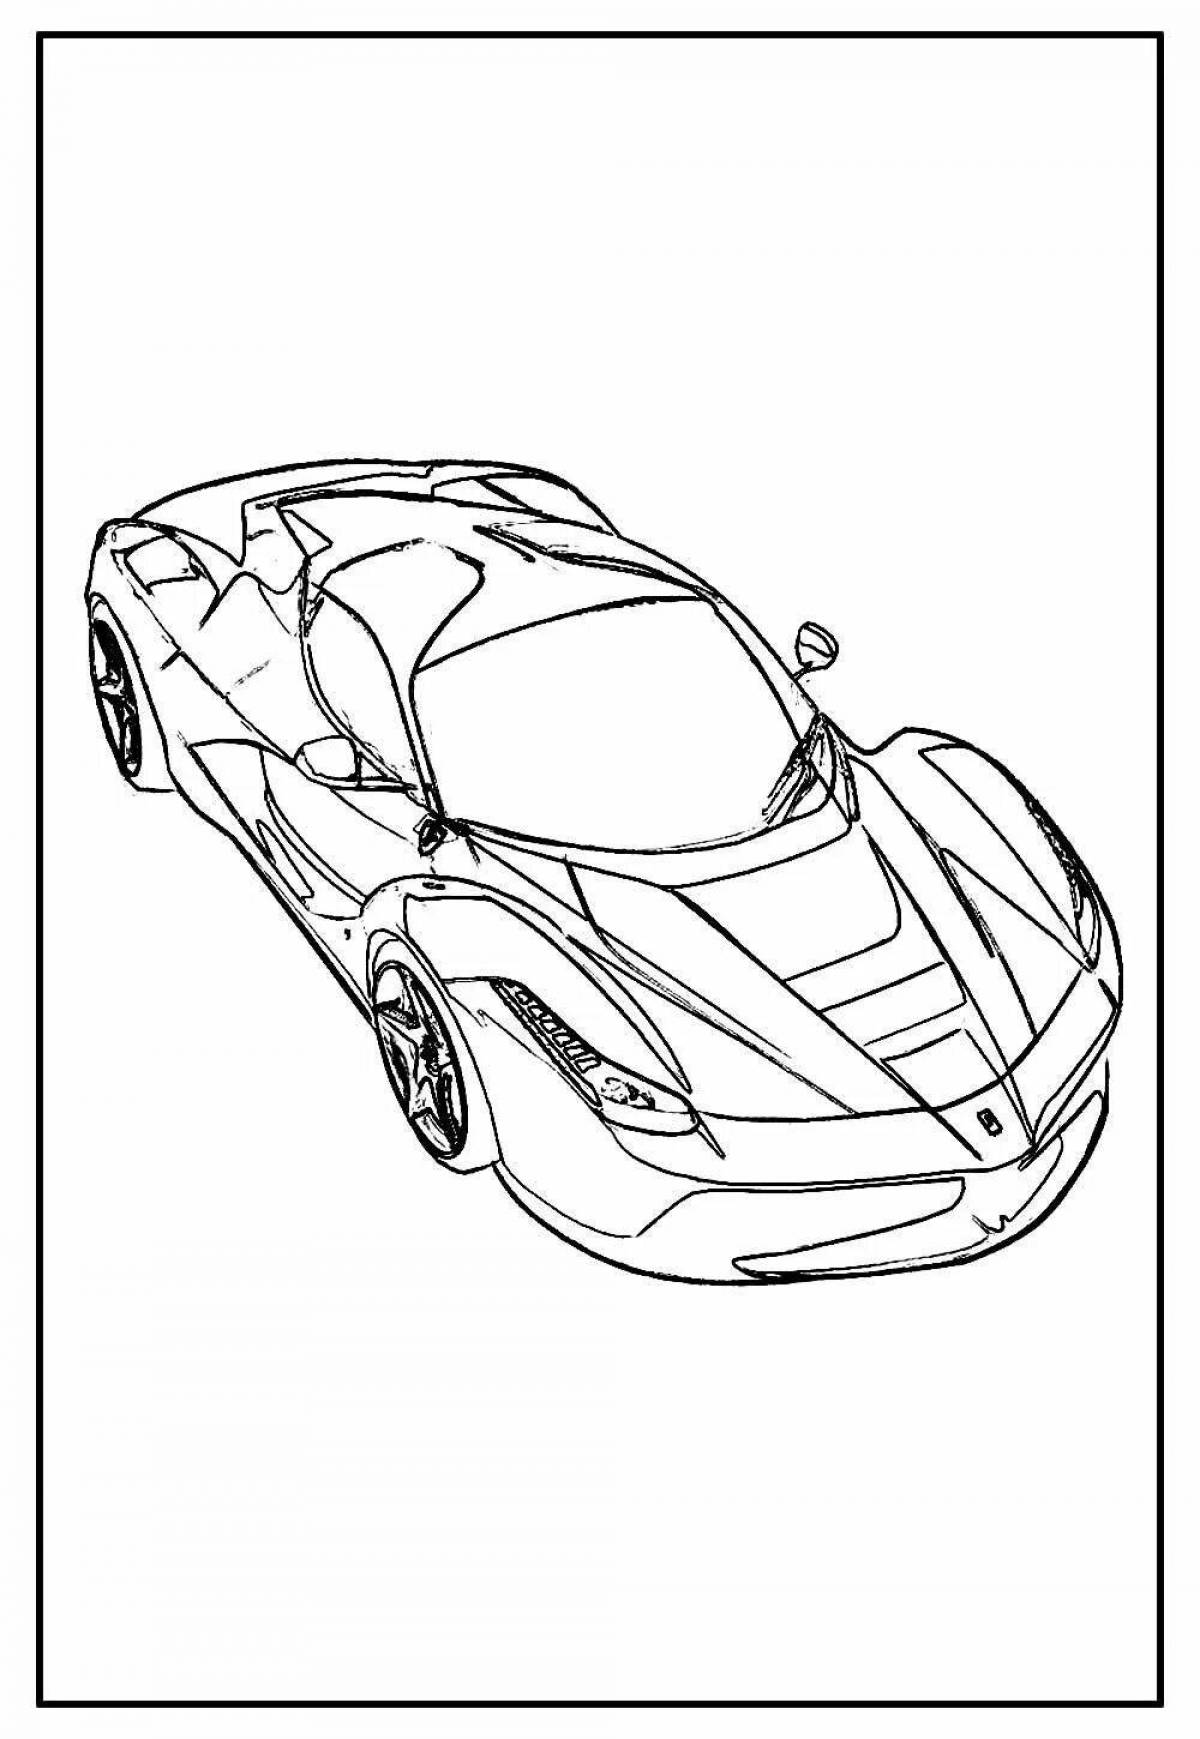 Coloring page spectacular cars lamba